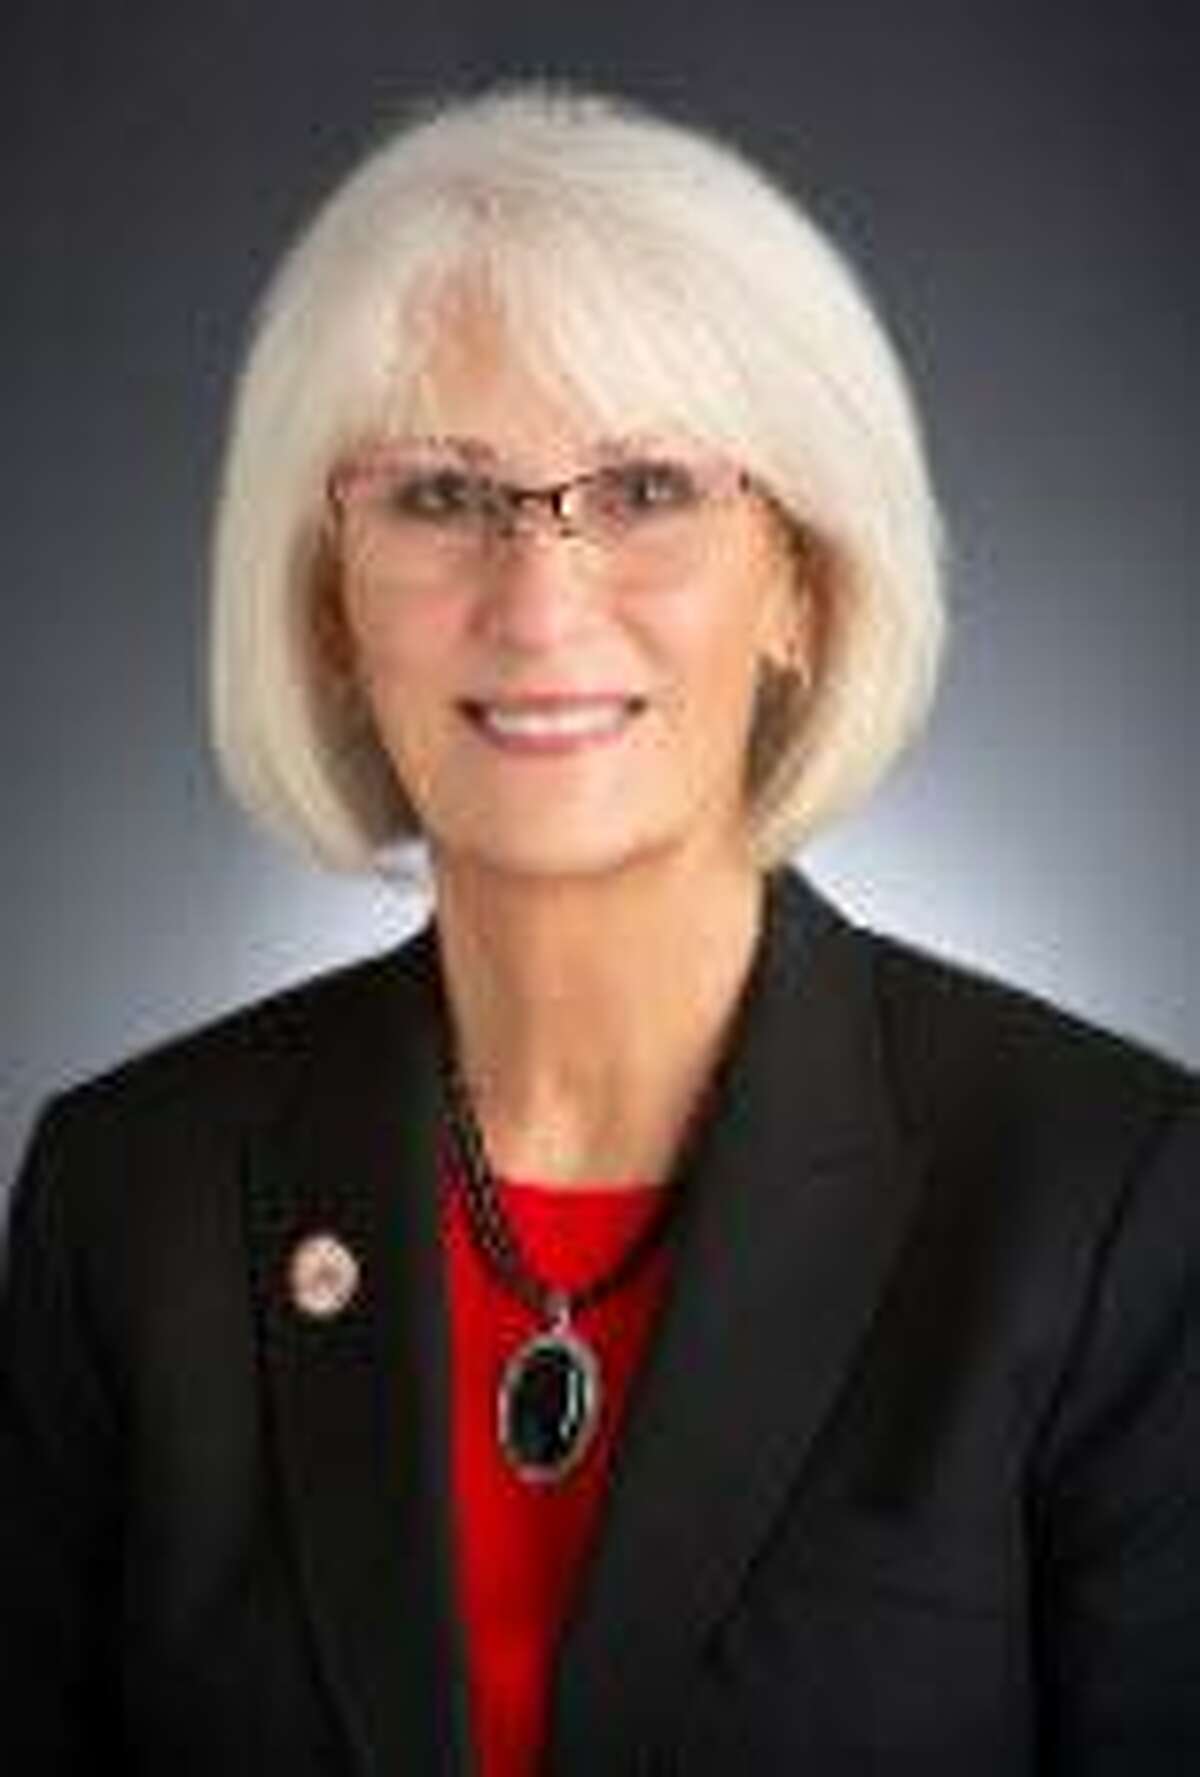 Janet Corte is Ward A councilwoman on the Katy City Council.